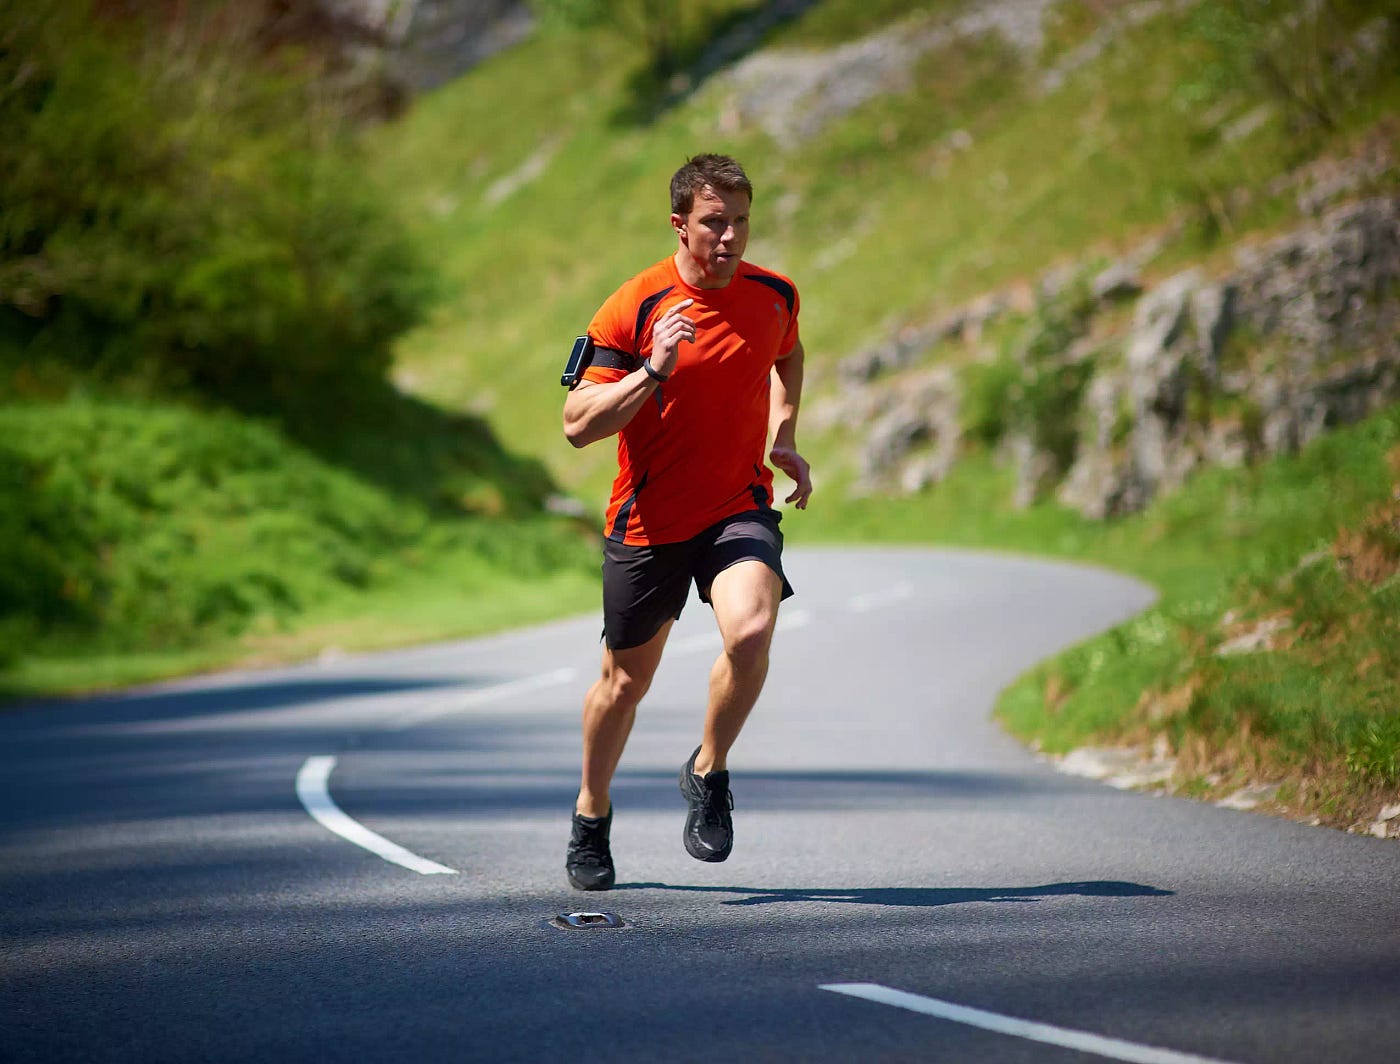 Top 9 Running Workouts to Build Speed and Endurance